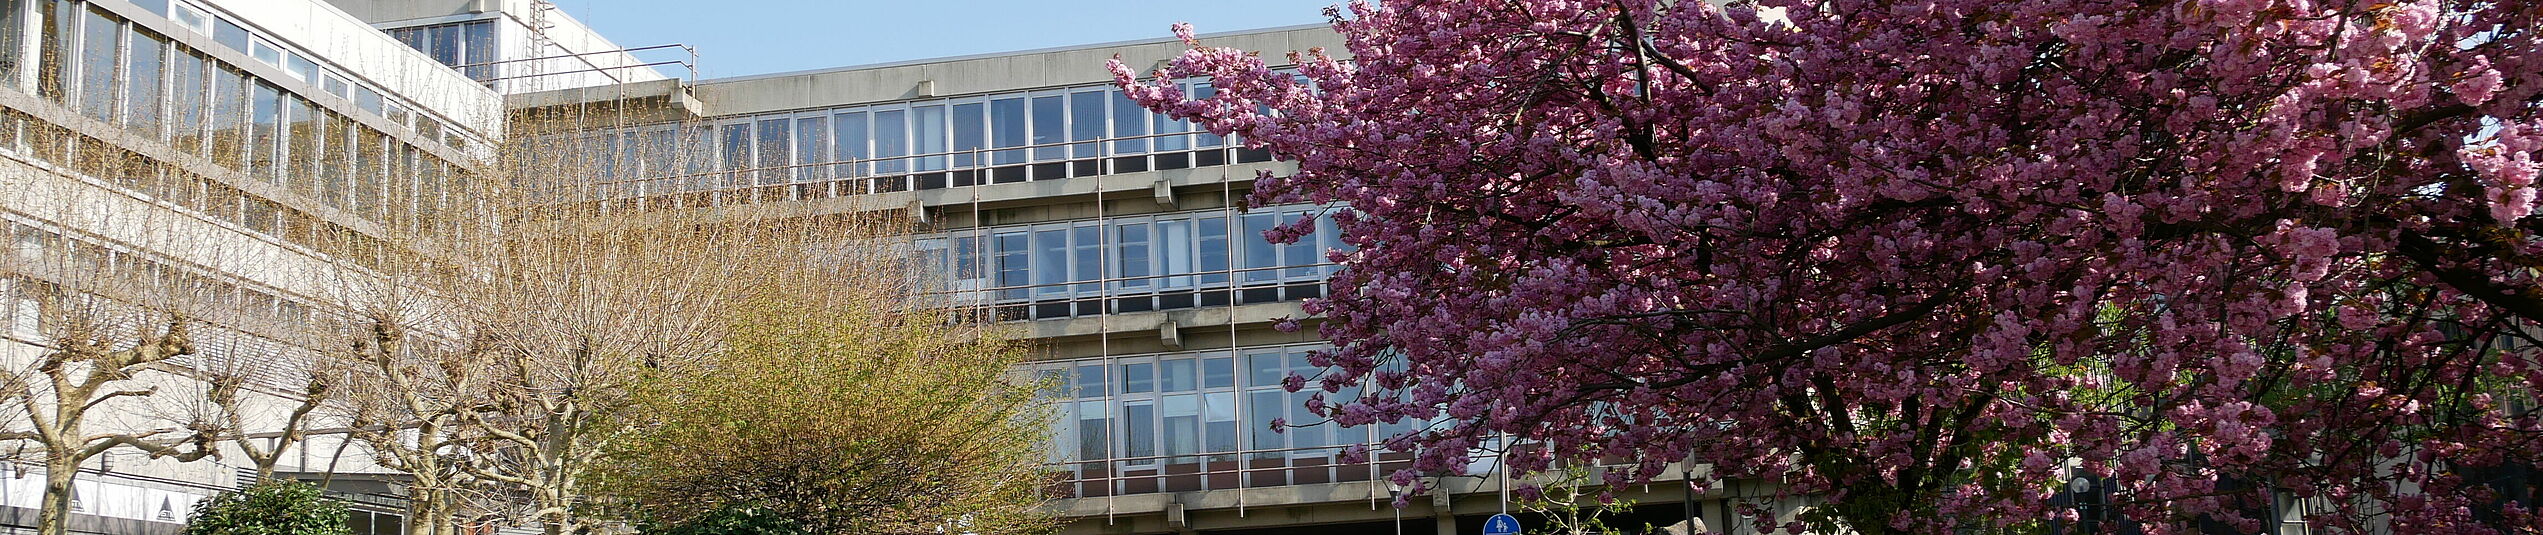 Blossoming cherry trees in front of Paderborn University.